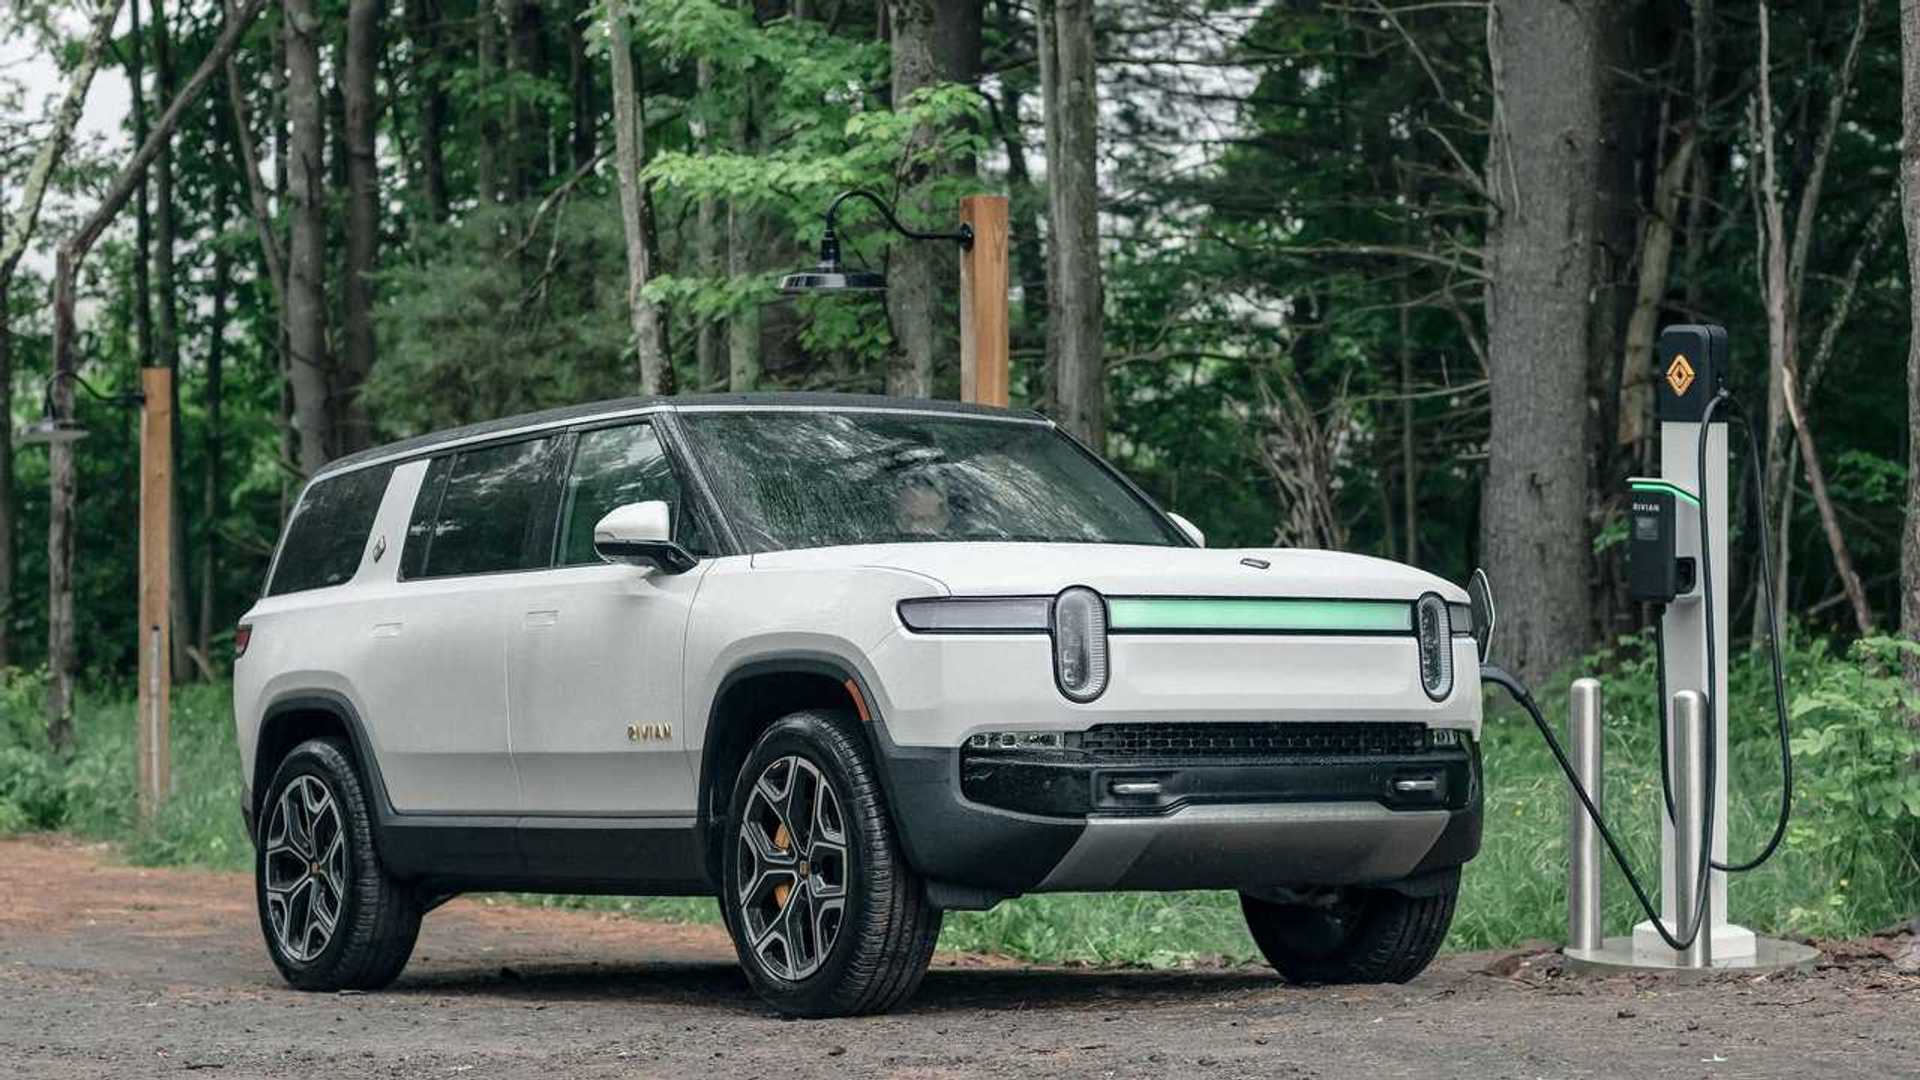 rivian software executive talks about features and upgrades in q&a